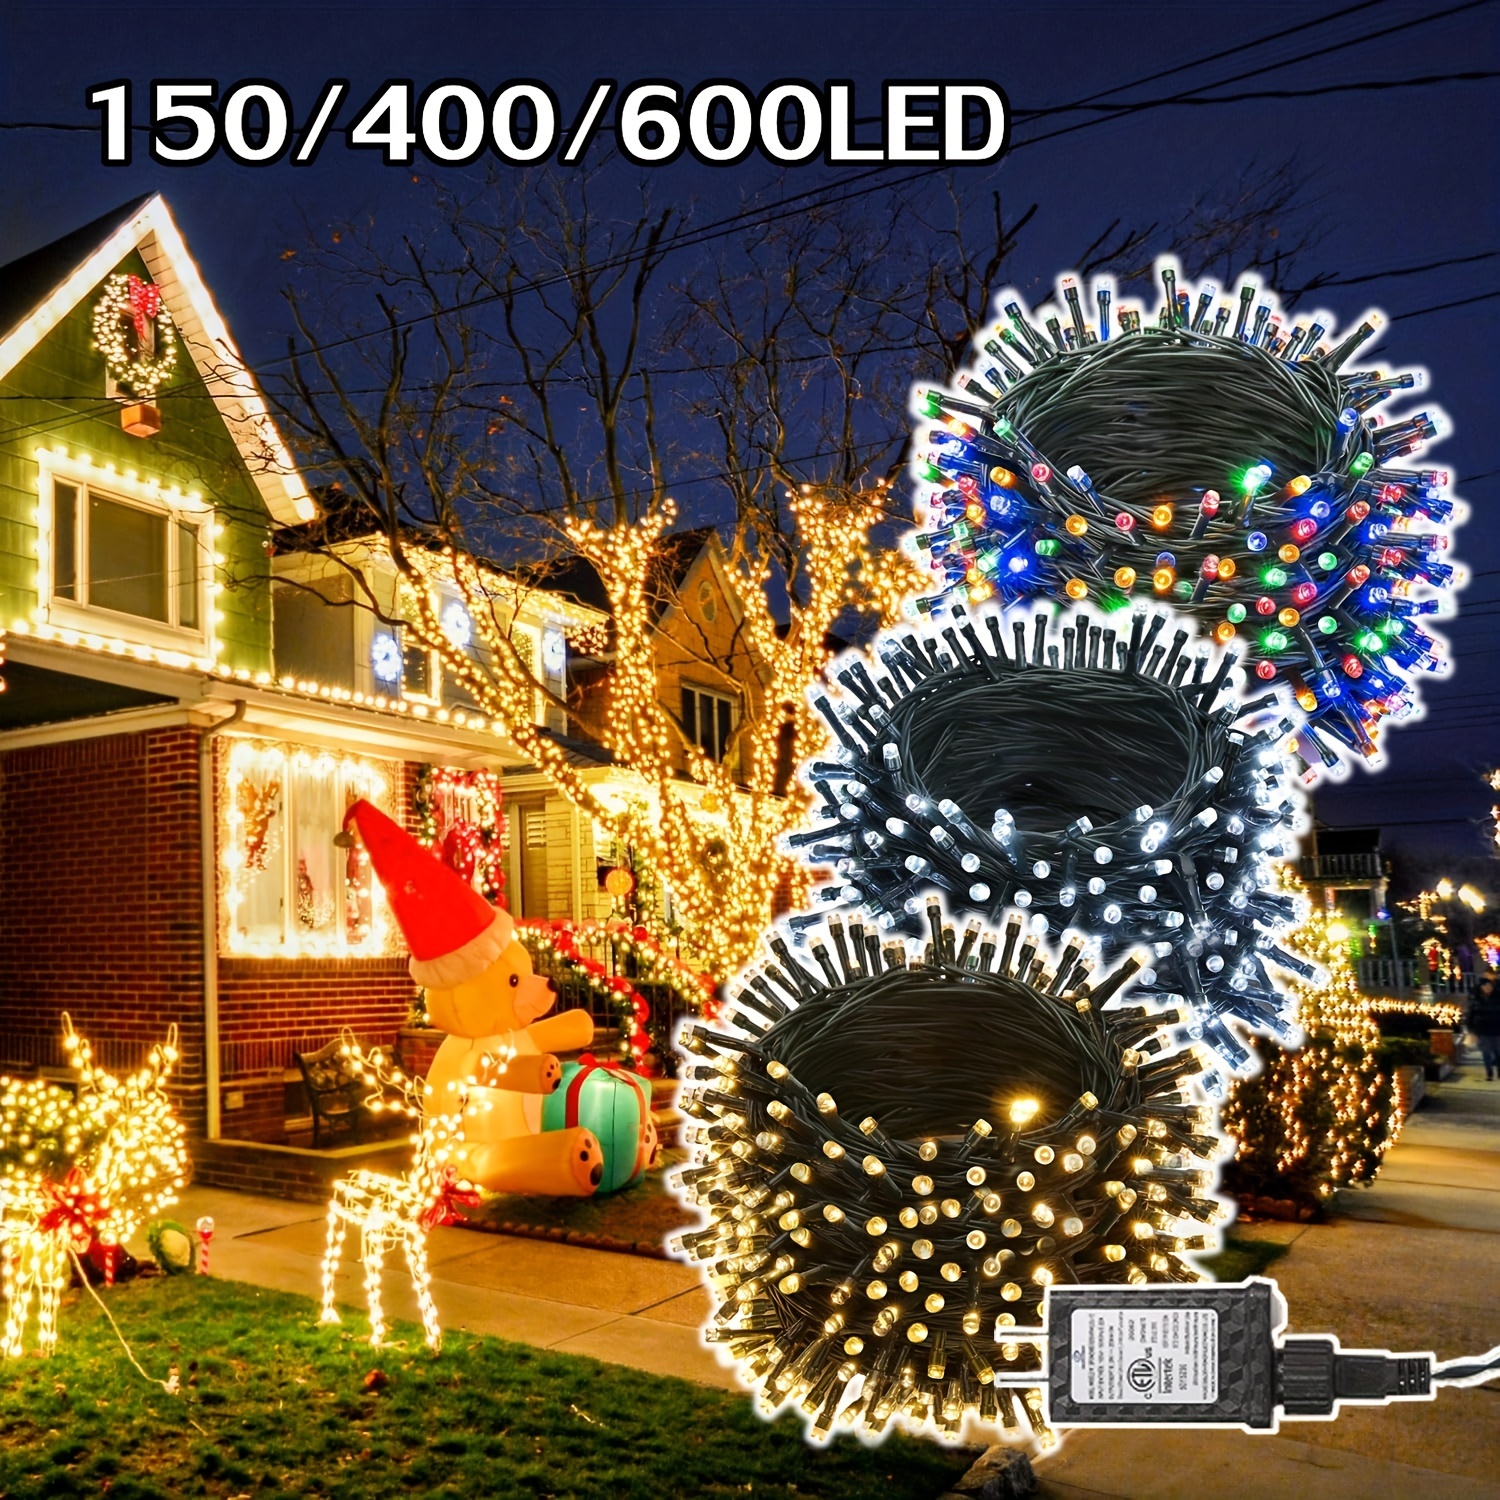 Christmas Lights Outdoor - 164ft String Lights 500 LED Christmas Lights -  Remote 8 Lighting Modes Memory Outdoor Waterproof Decorations for Home Xmas  Tree Yard Decor (Warm White) 